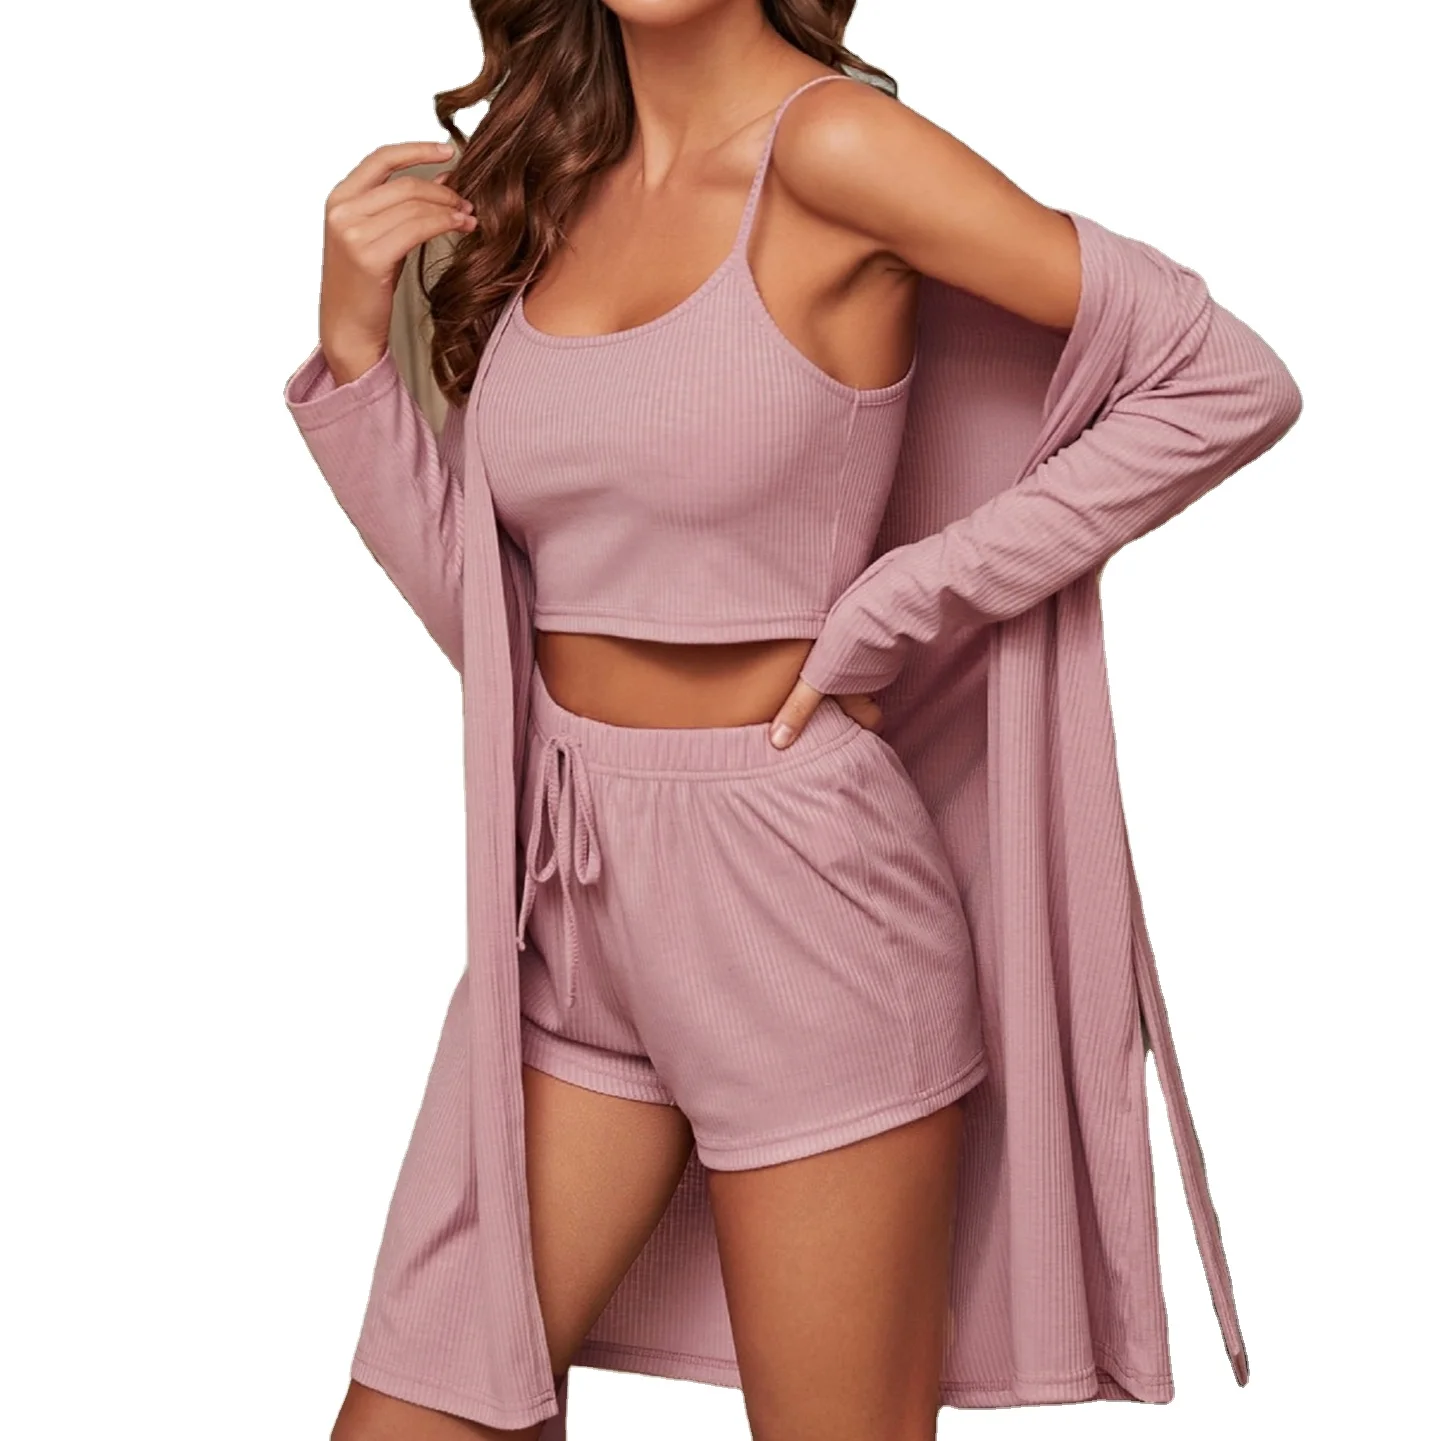 

Customized three piece cotton woman nightgown soft lounge wear women solid cami top & shorts & robe 3 piece pajama set, Picture shows